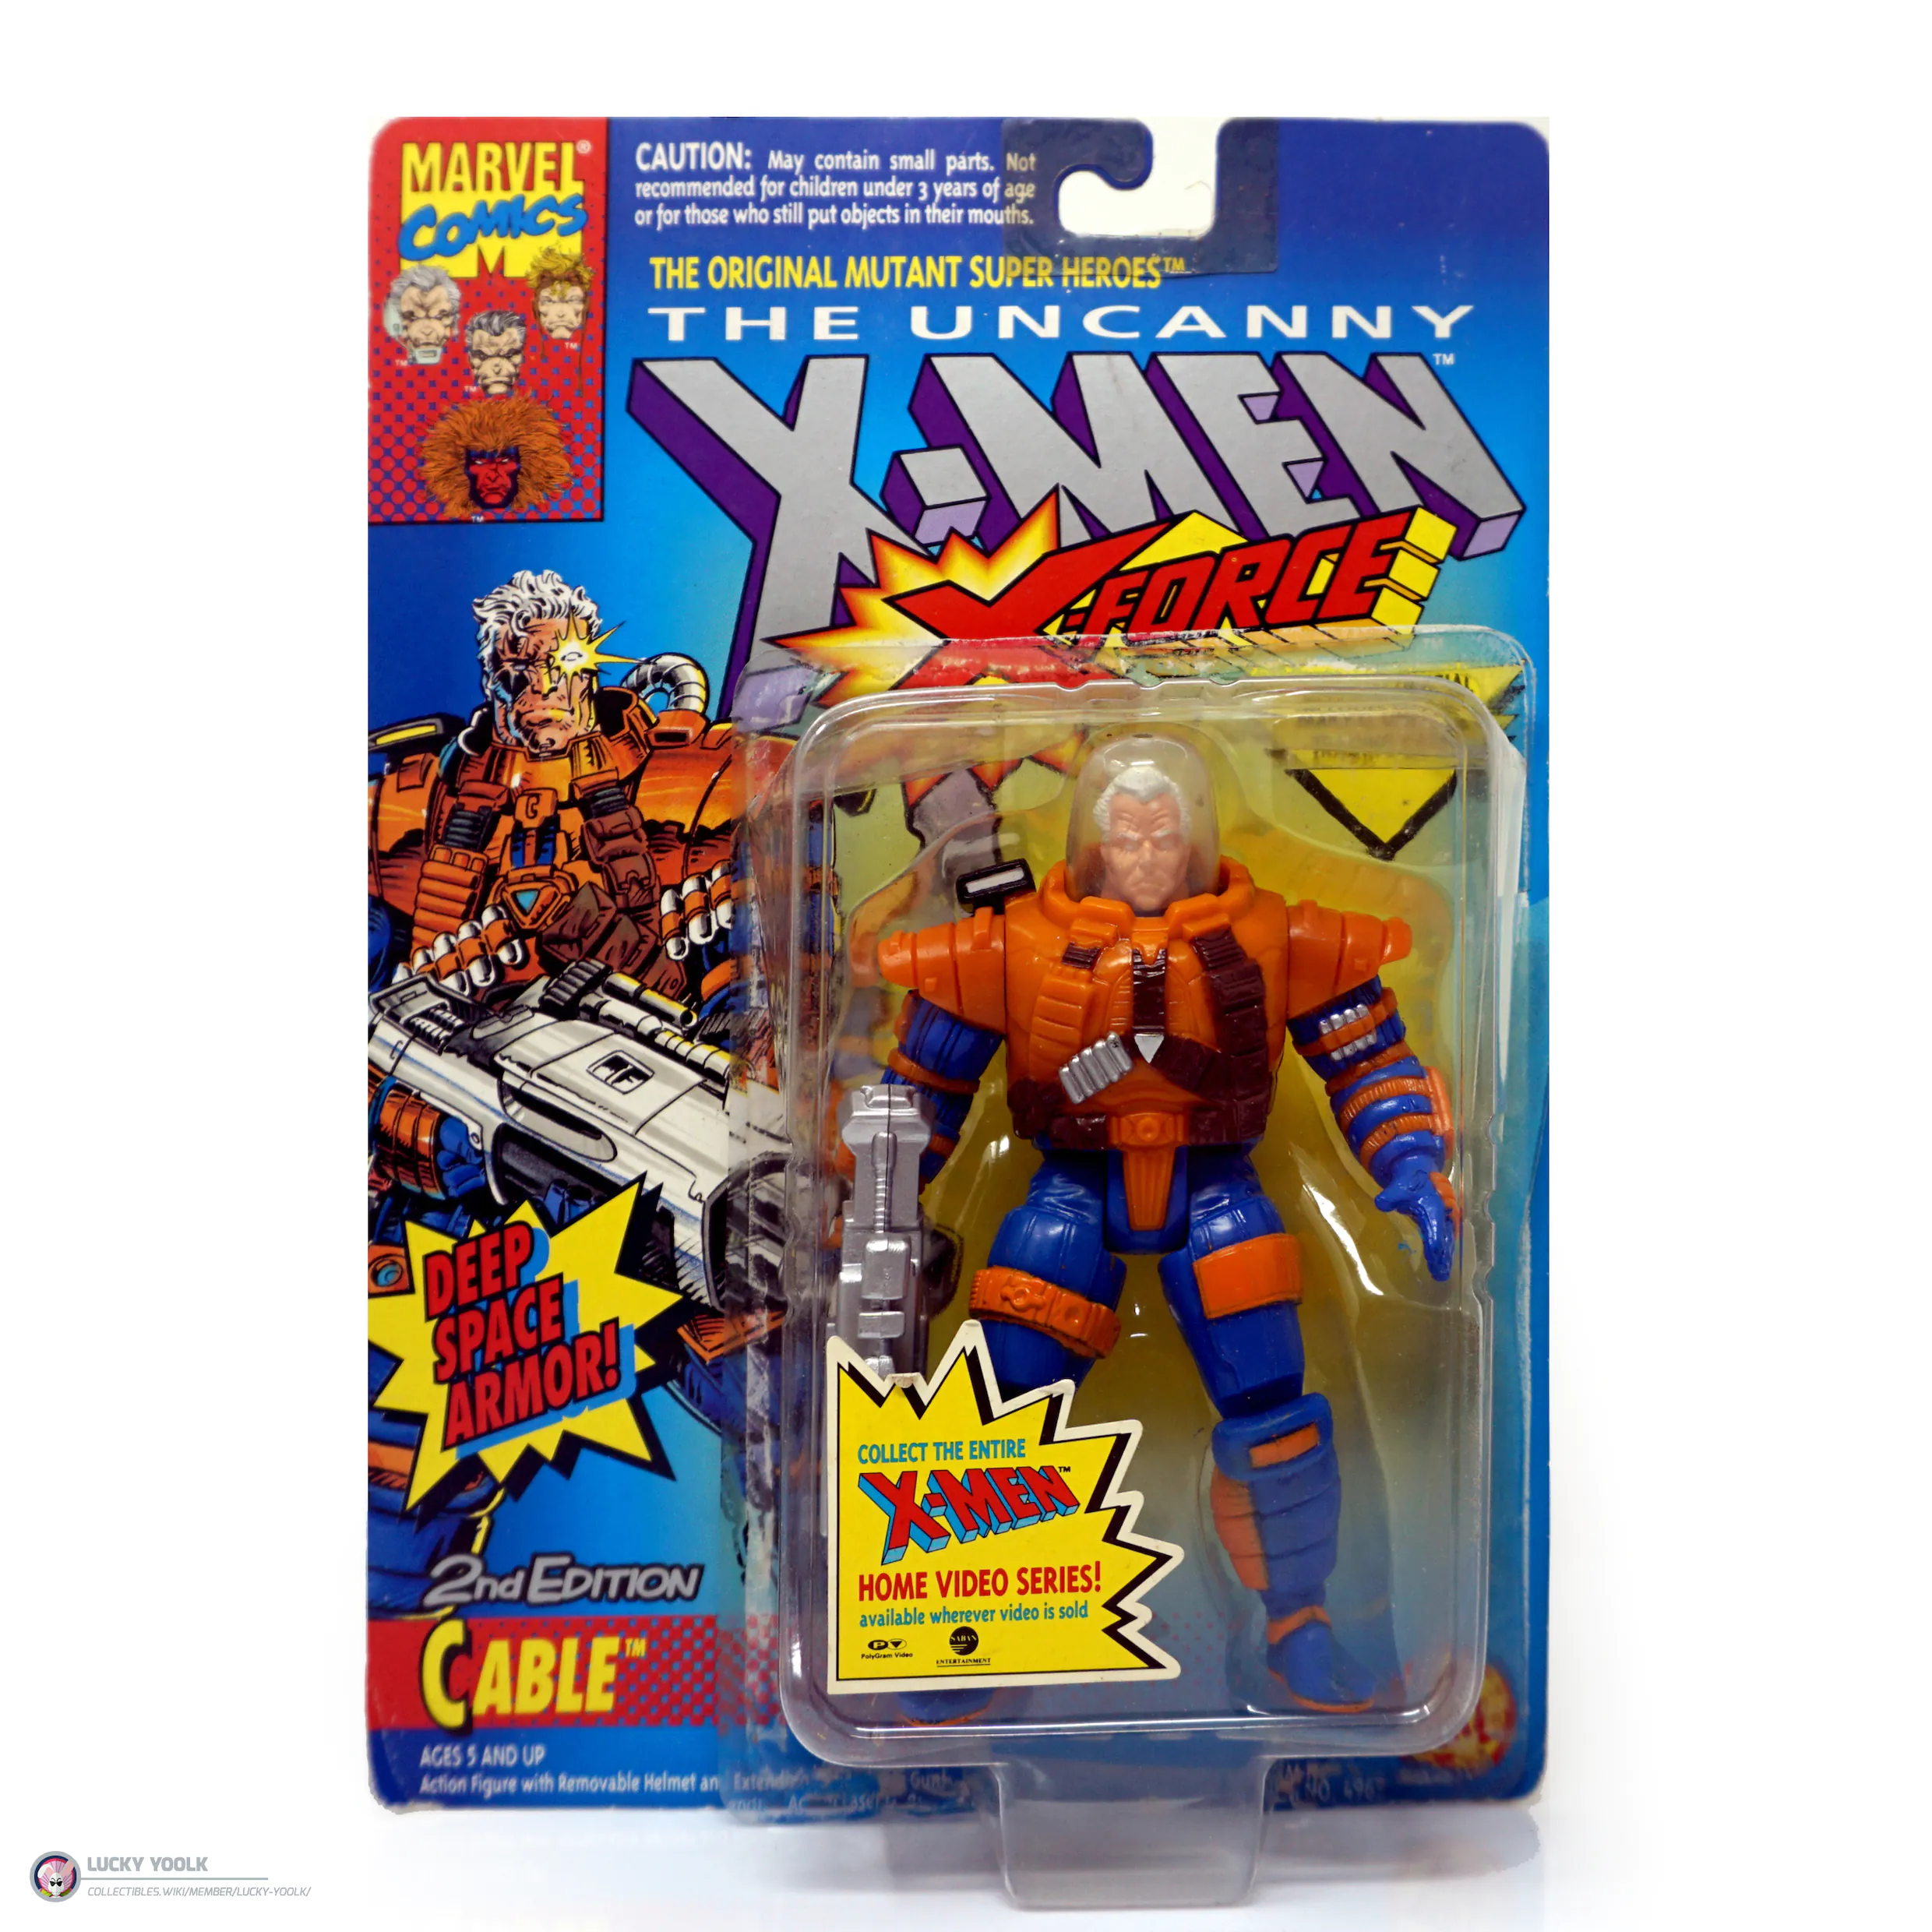 X-Men X-Force – Cable (2nd Edition)